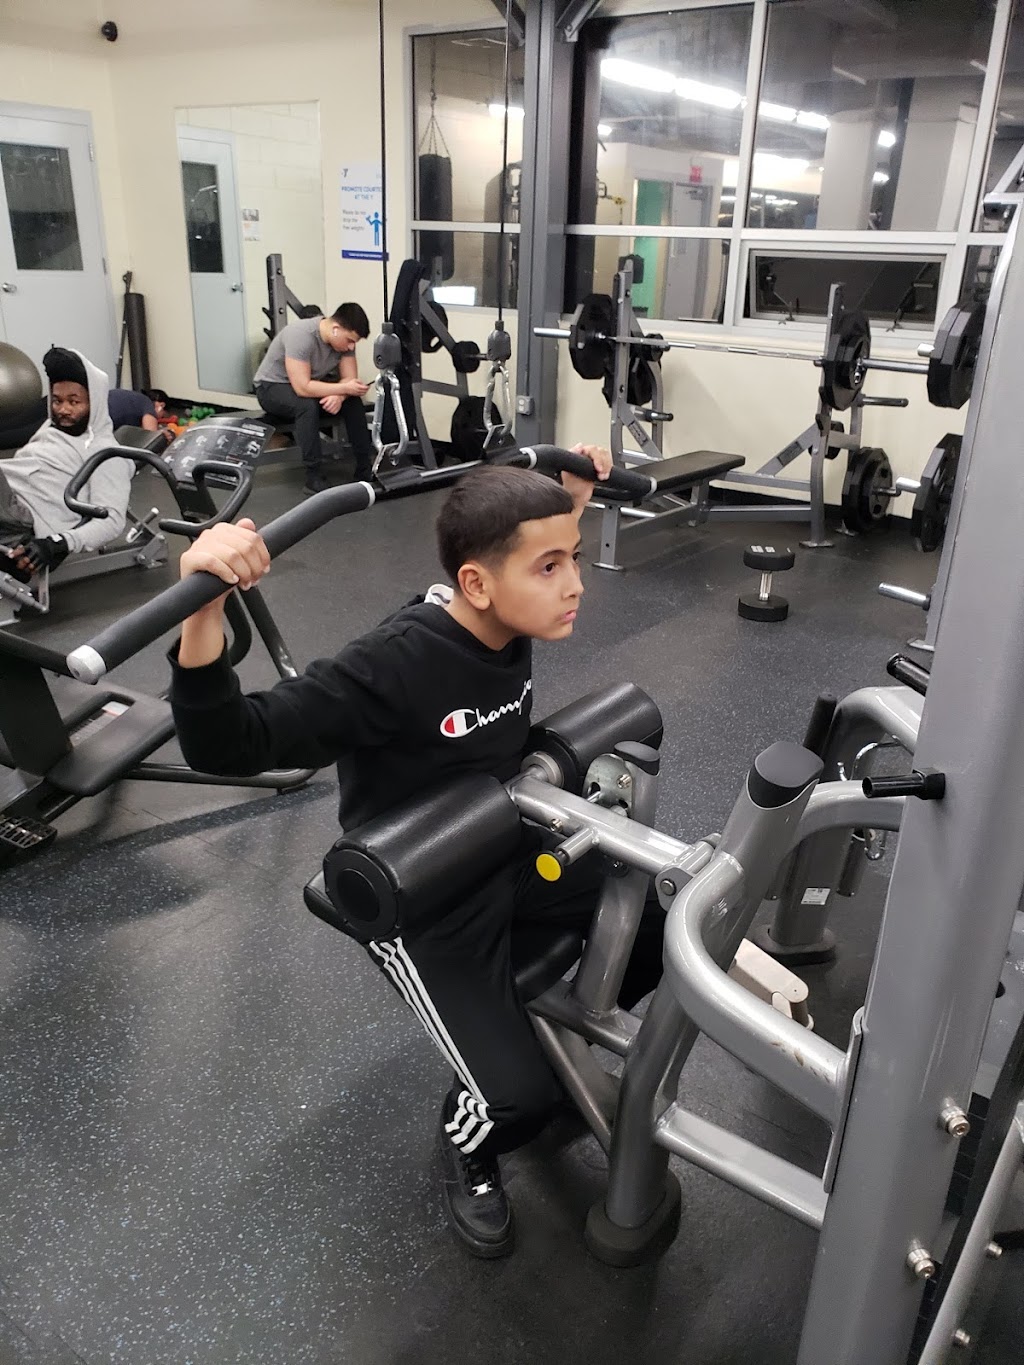 Castle Hill YMCA | 2 Castle Hill Ave, Bronx, NY 10473 | Phone: (212) 912-2490